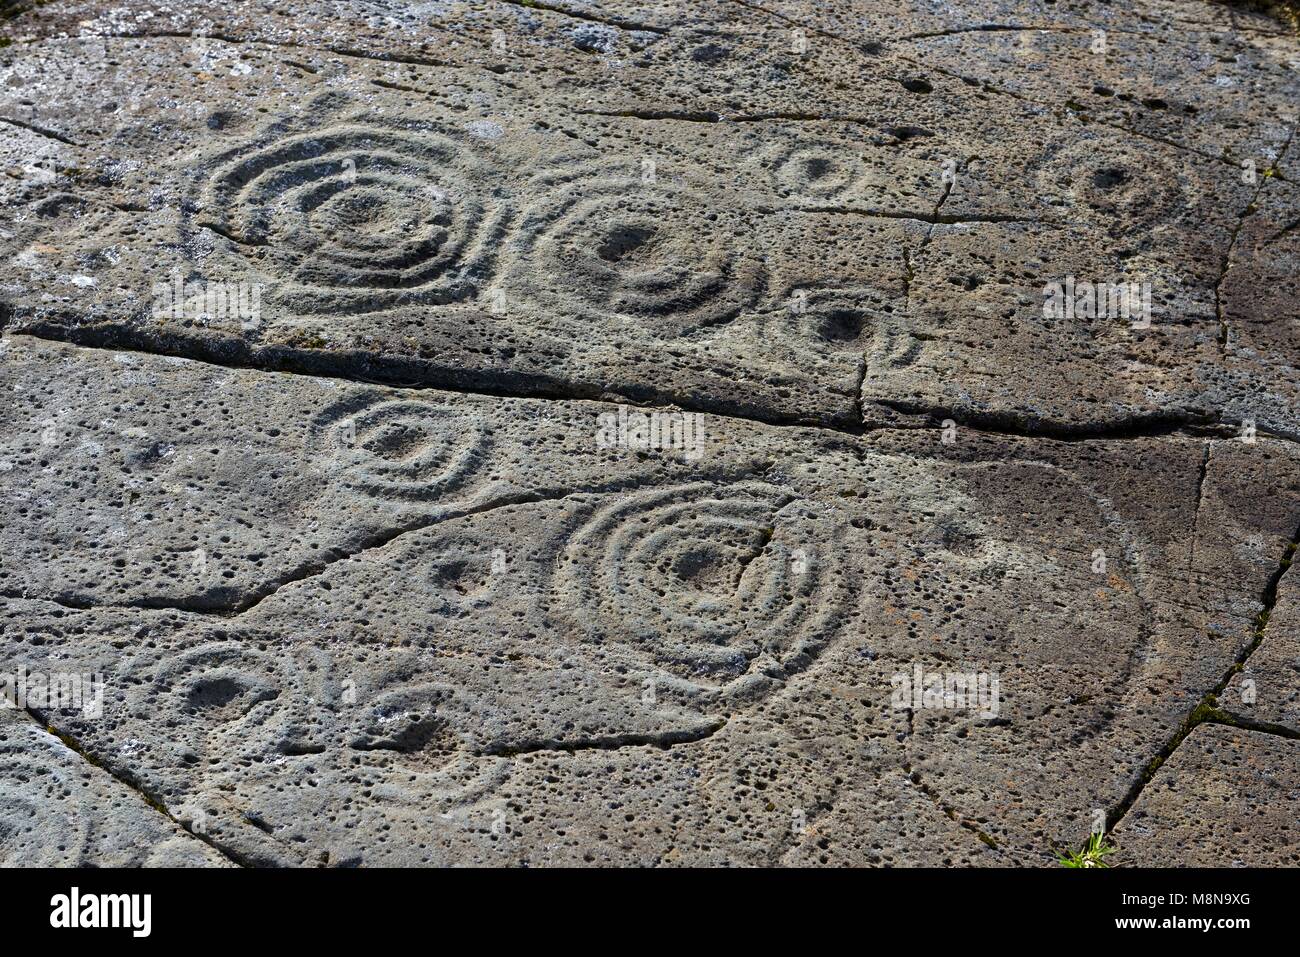 Cup and ring mark marks prehistoric Neolithic rock art on natural rock outcrop at Cairnbaan in Kilmartin Valley, Argyll, Scotland, UK Stock Photo